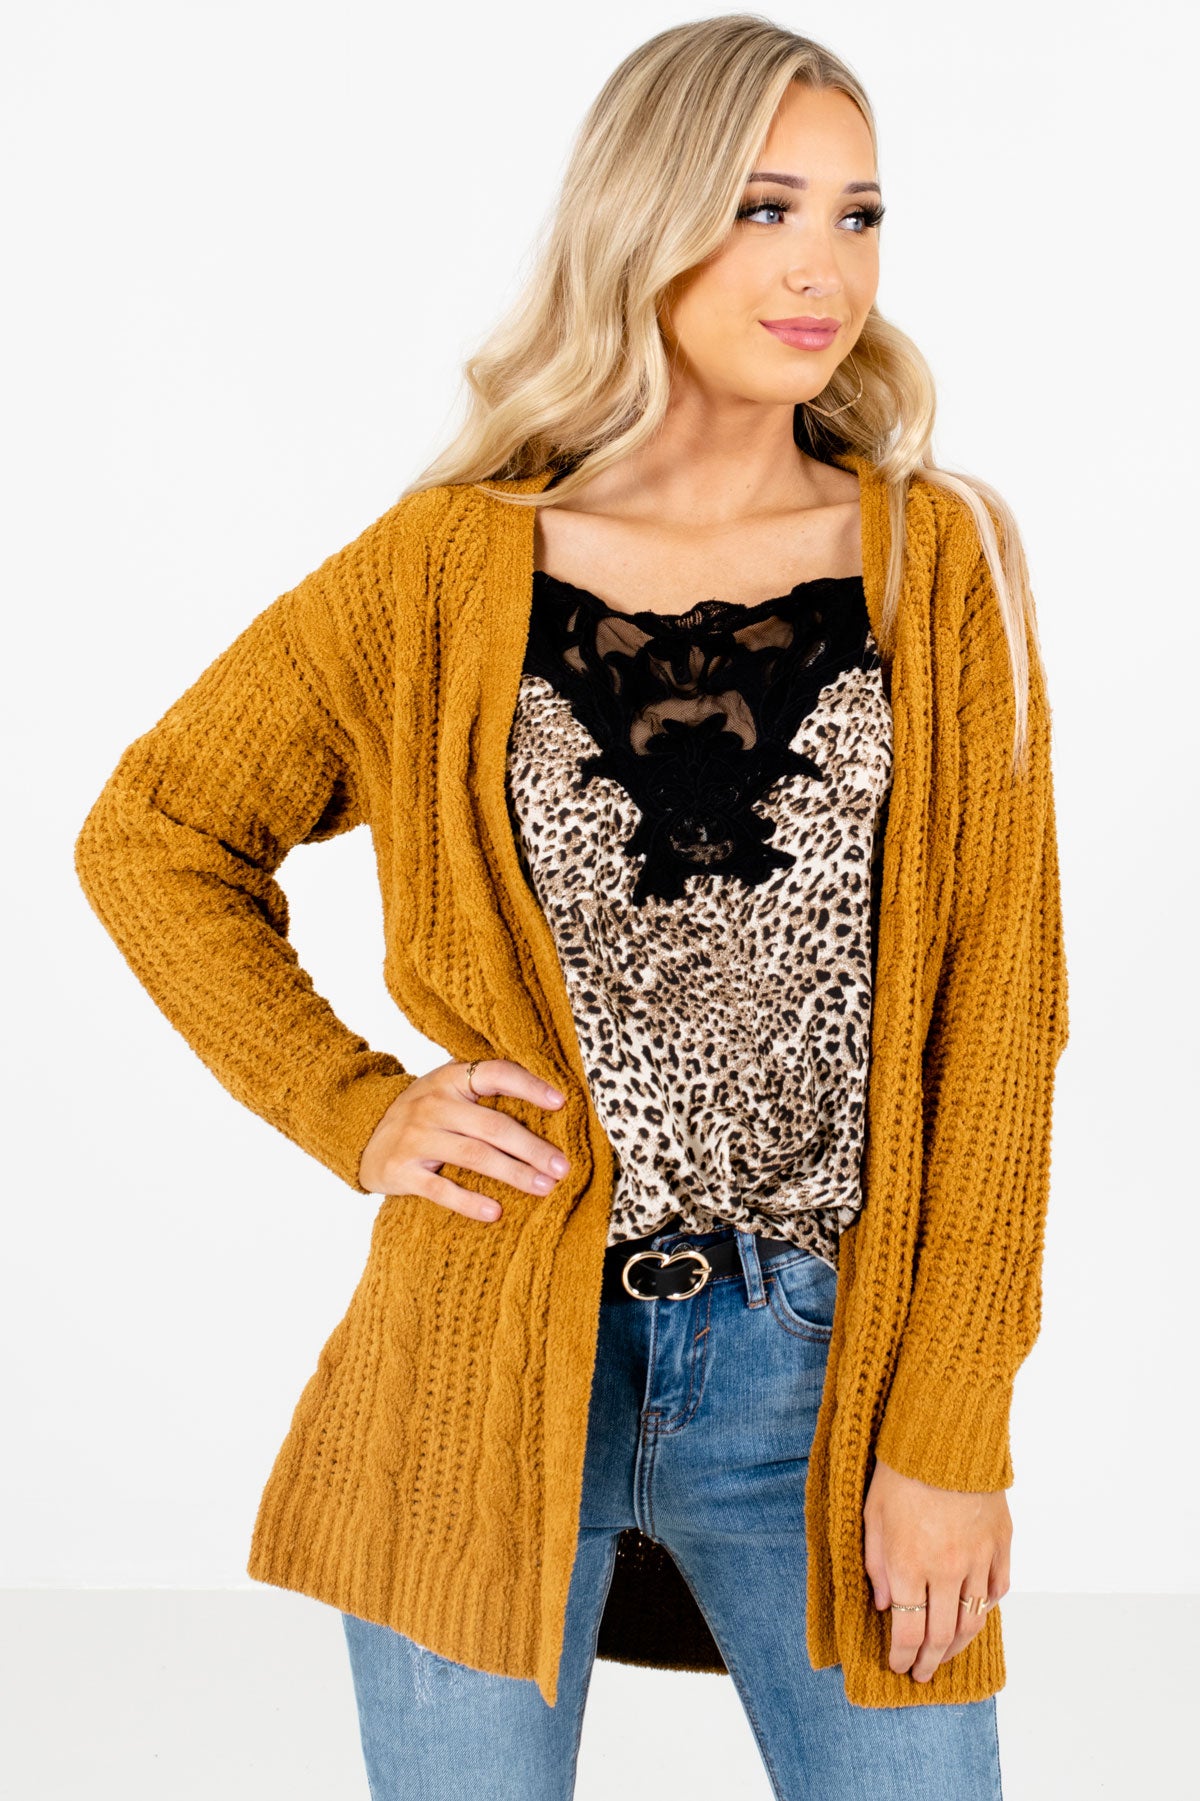 Mustard Yellow High-Quality Knit Material Boutique Cardigans for Women